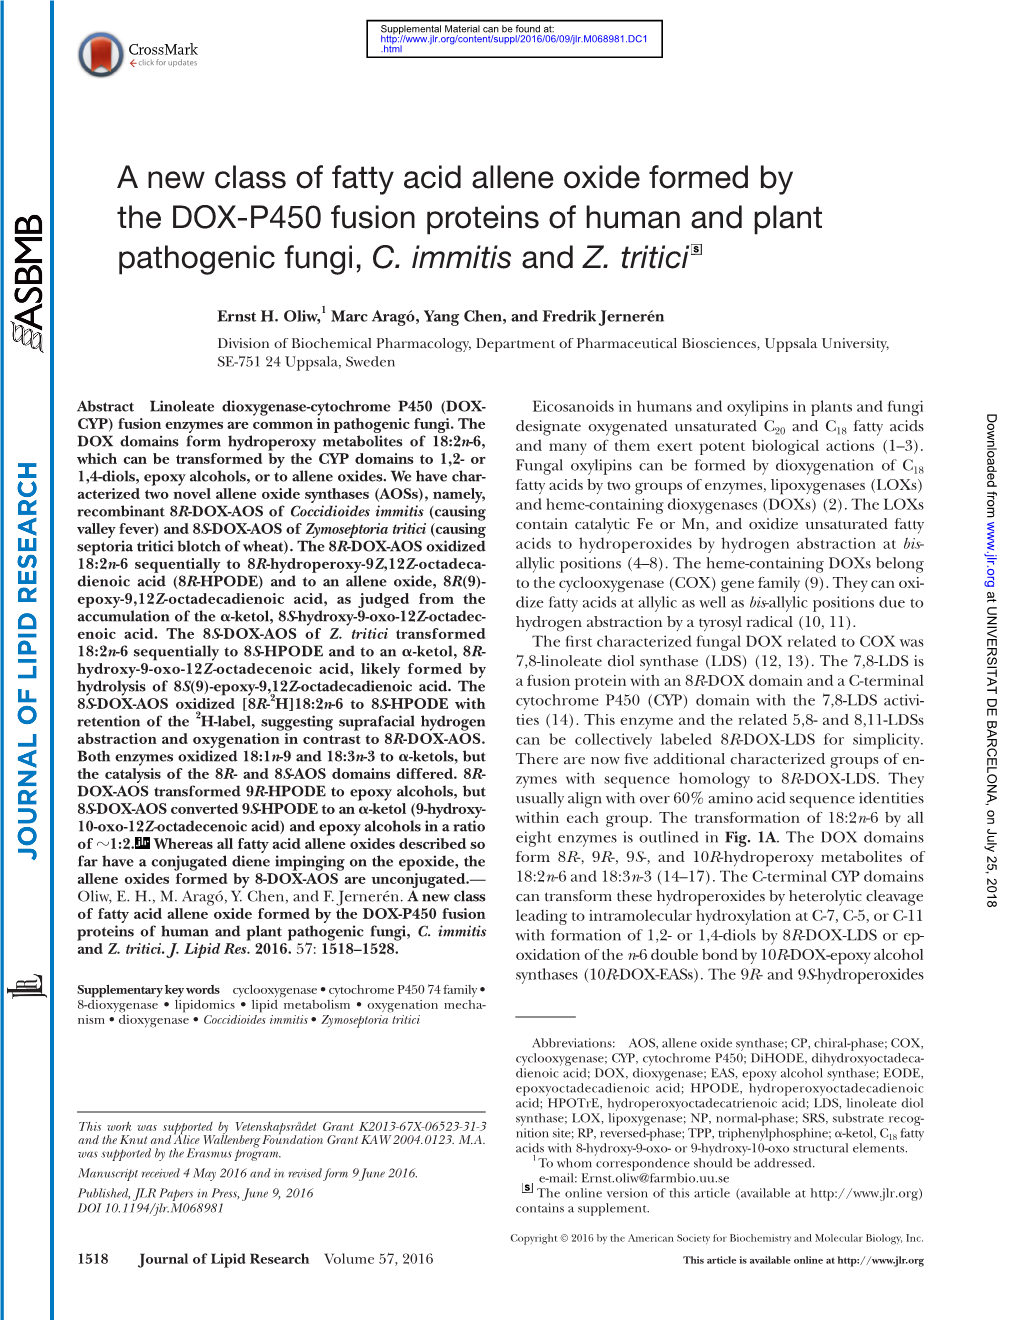 A New Class of Fatty Acid Allene Oxide Formed by the DOX-P450 Fusion Proteins of Human and Plant Pathogenic Fungi, C